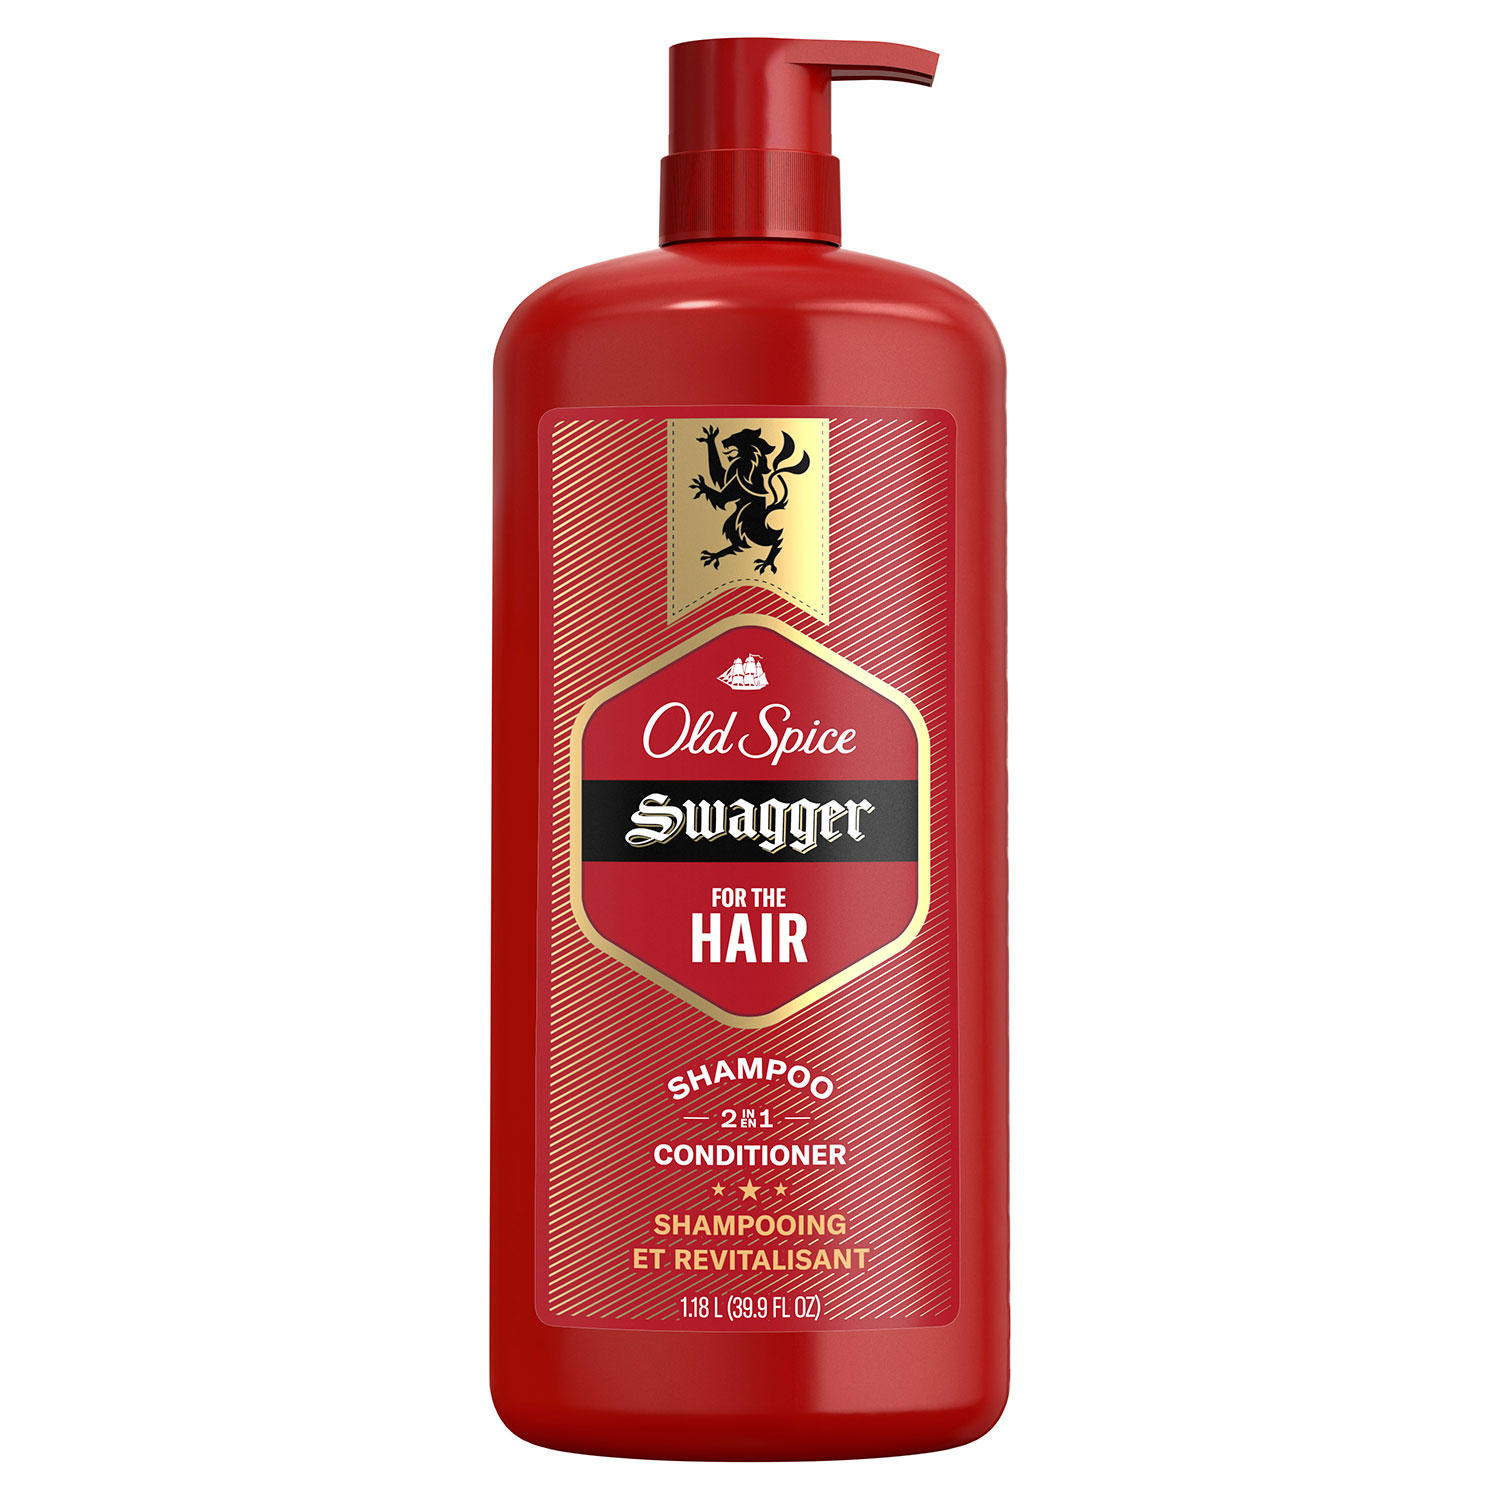 Old Spice Swagger 2 in1 Shampoo and Conditioner for Men (39.9 fl. oz.)